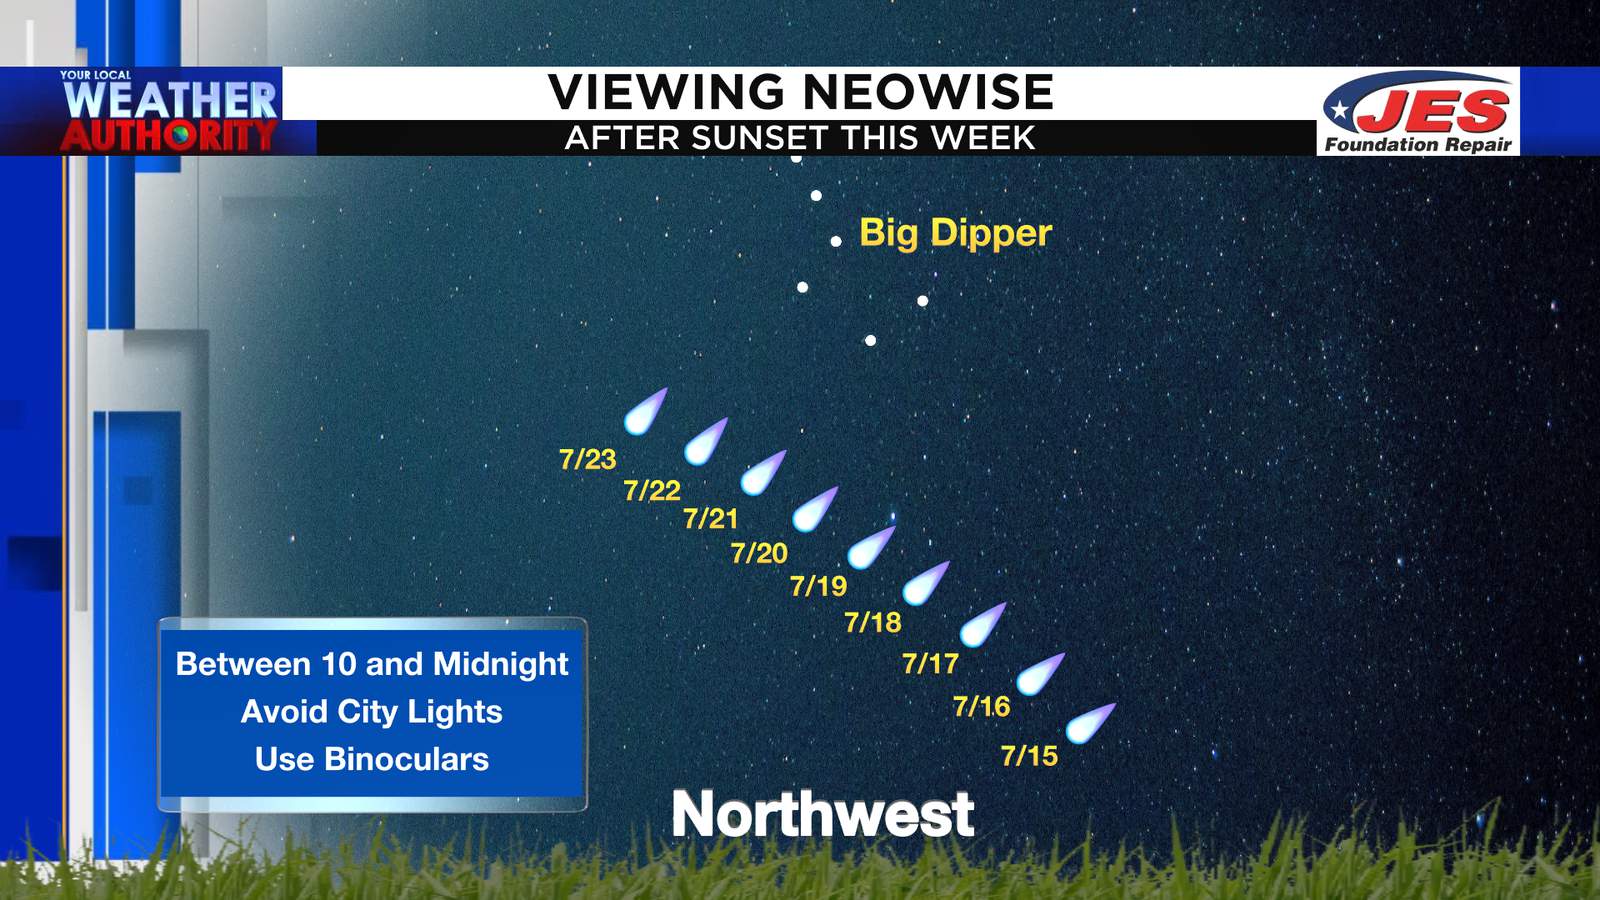 Keep looking! NEOWISE continues to get higher in the evening sky this week